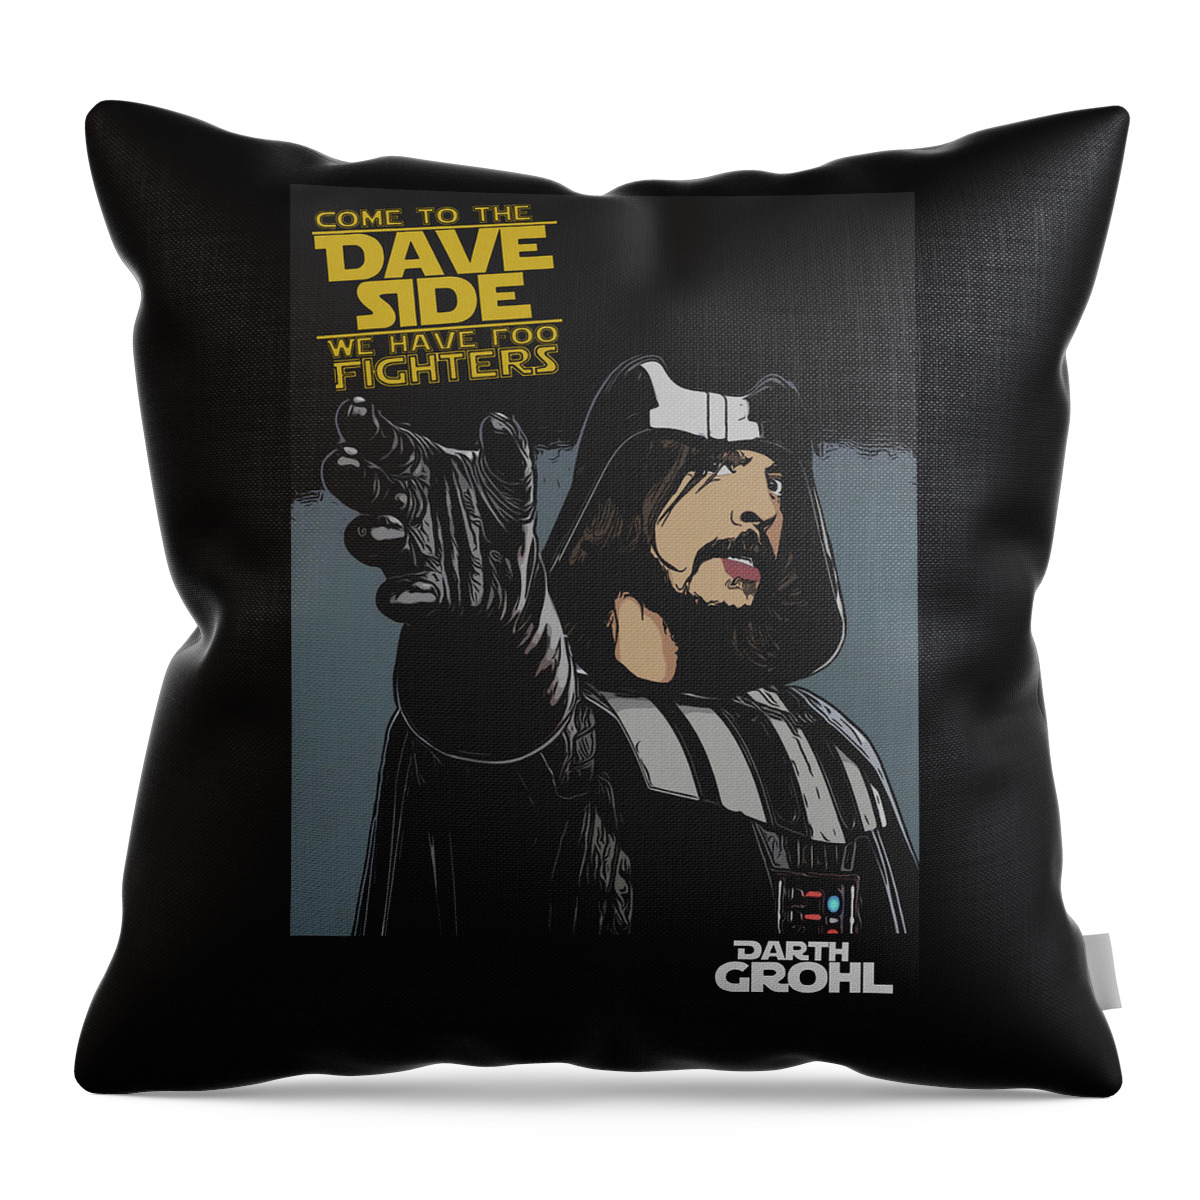 Dave Grohl Throw Pillow featuring the digital art Darth Grohl by Christina Rick